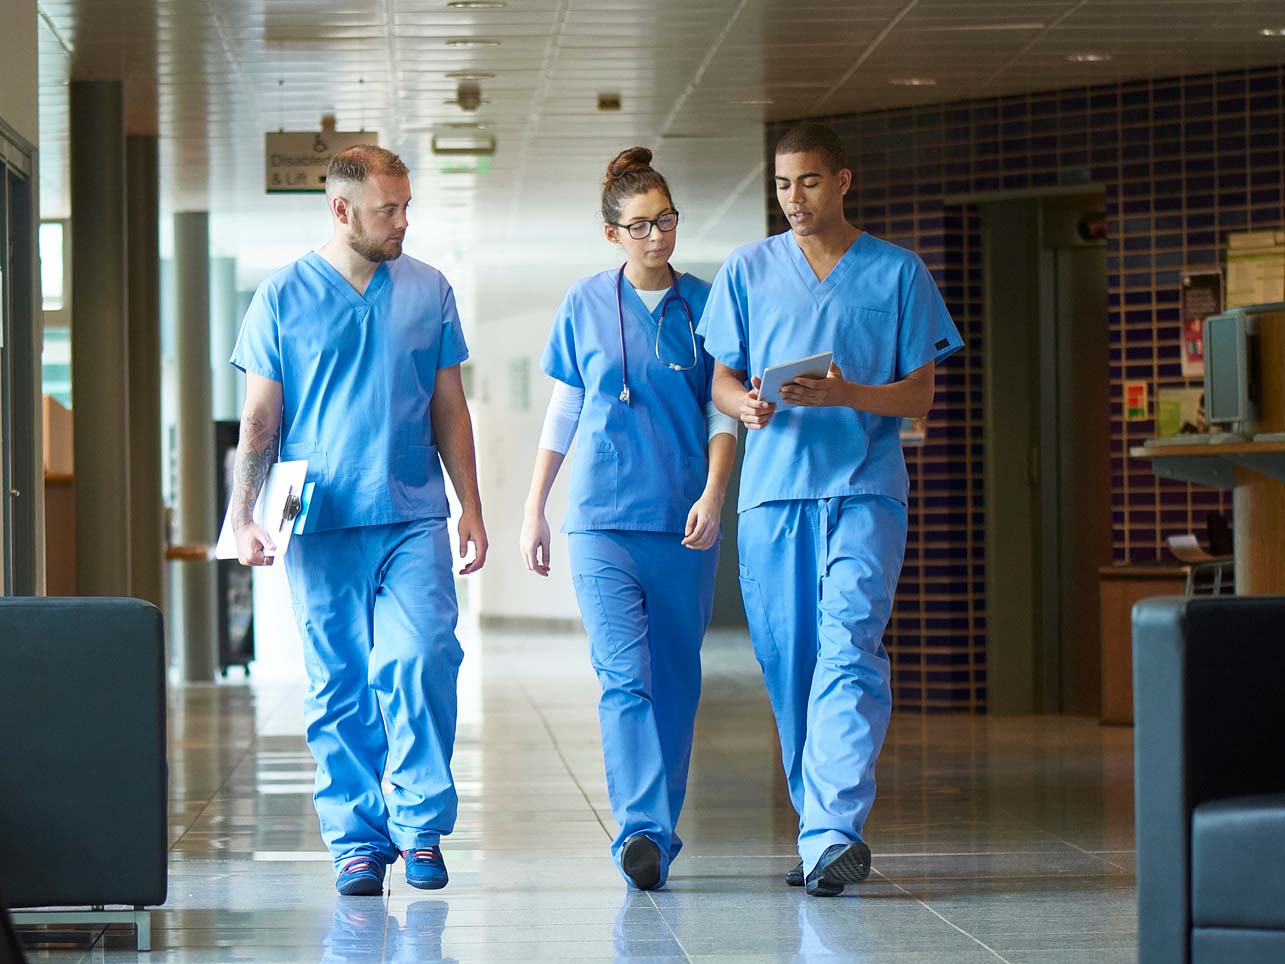 A group of medical residents discuss while walking through a hospital hallway